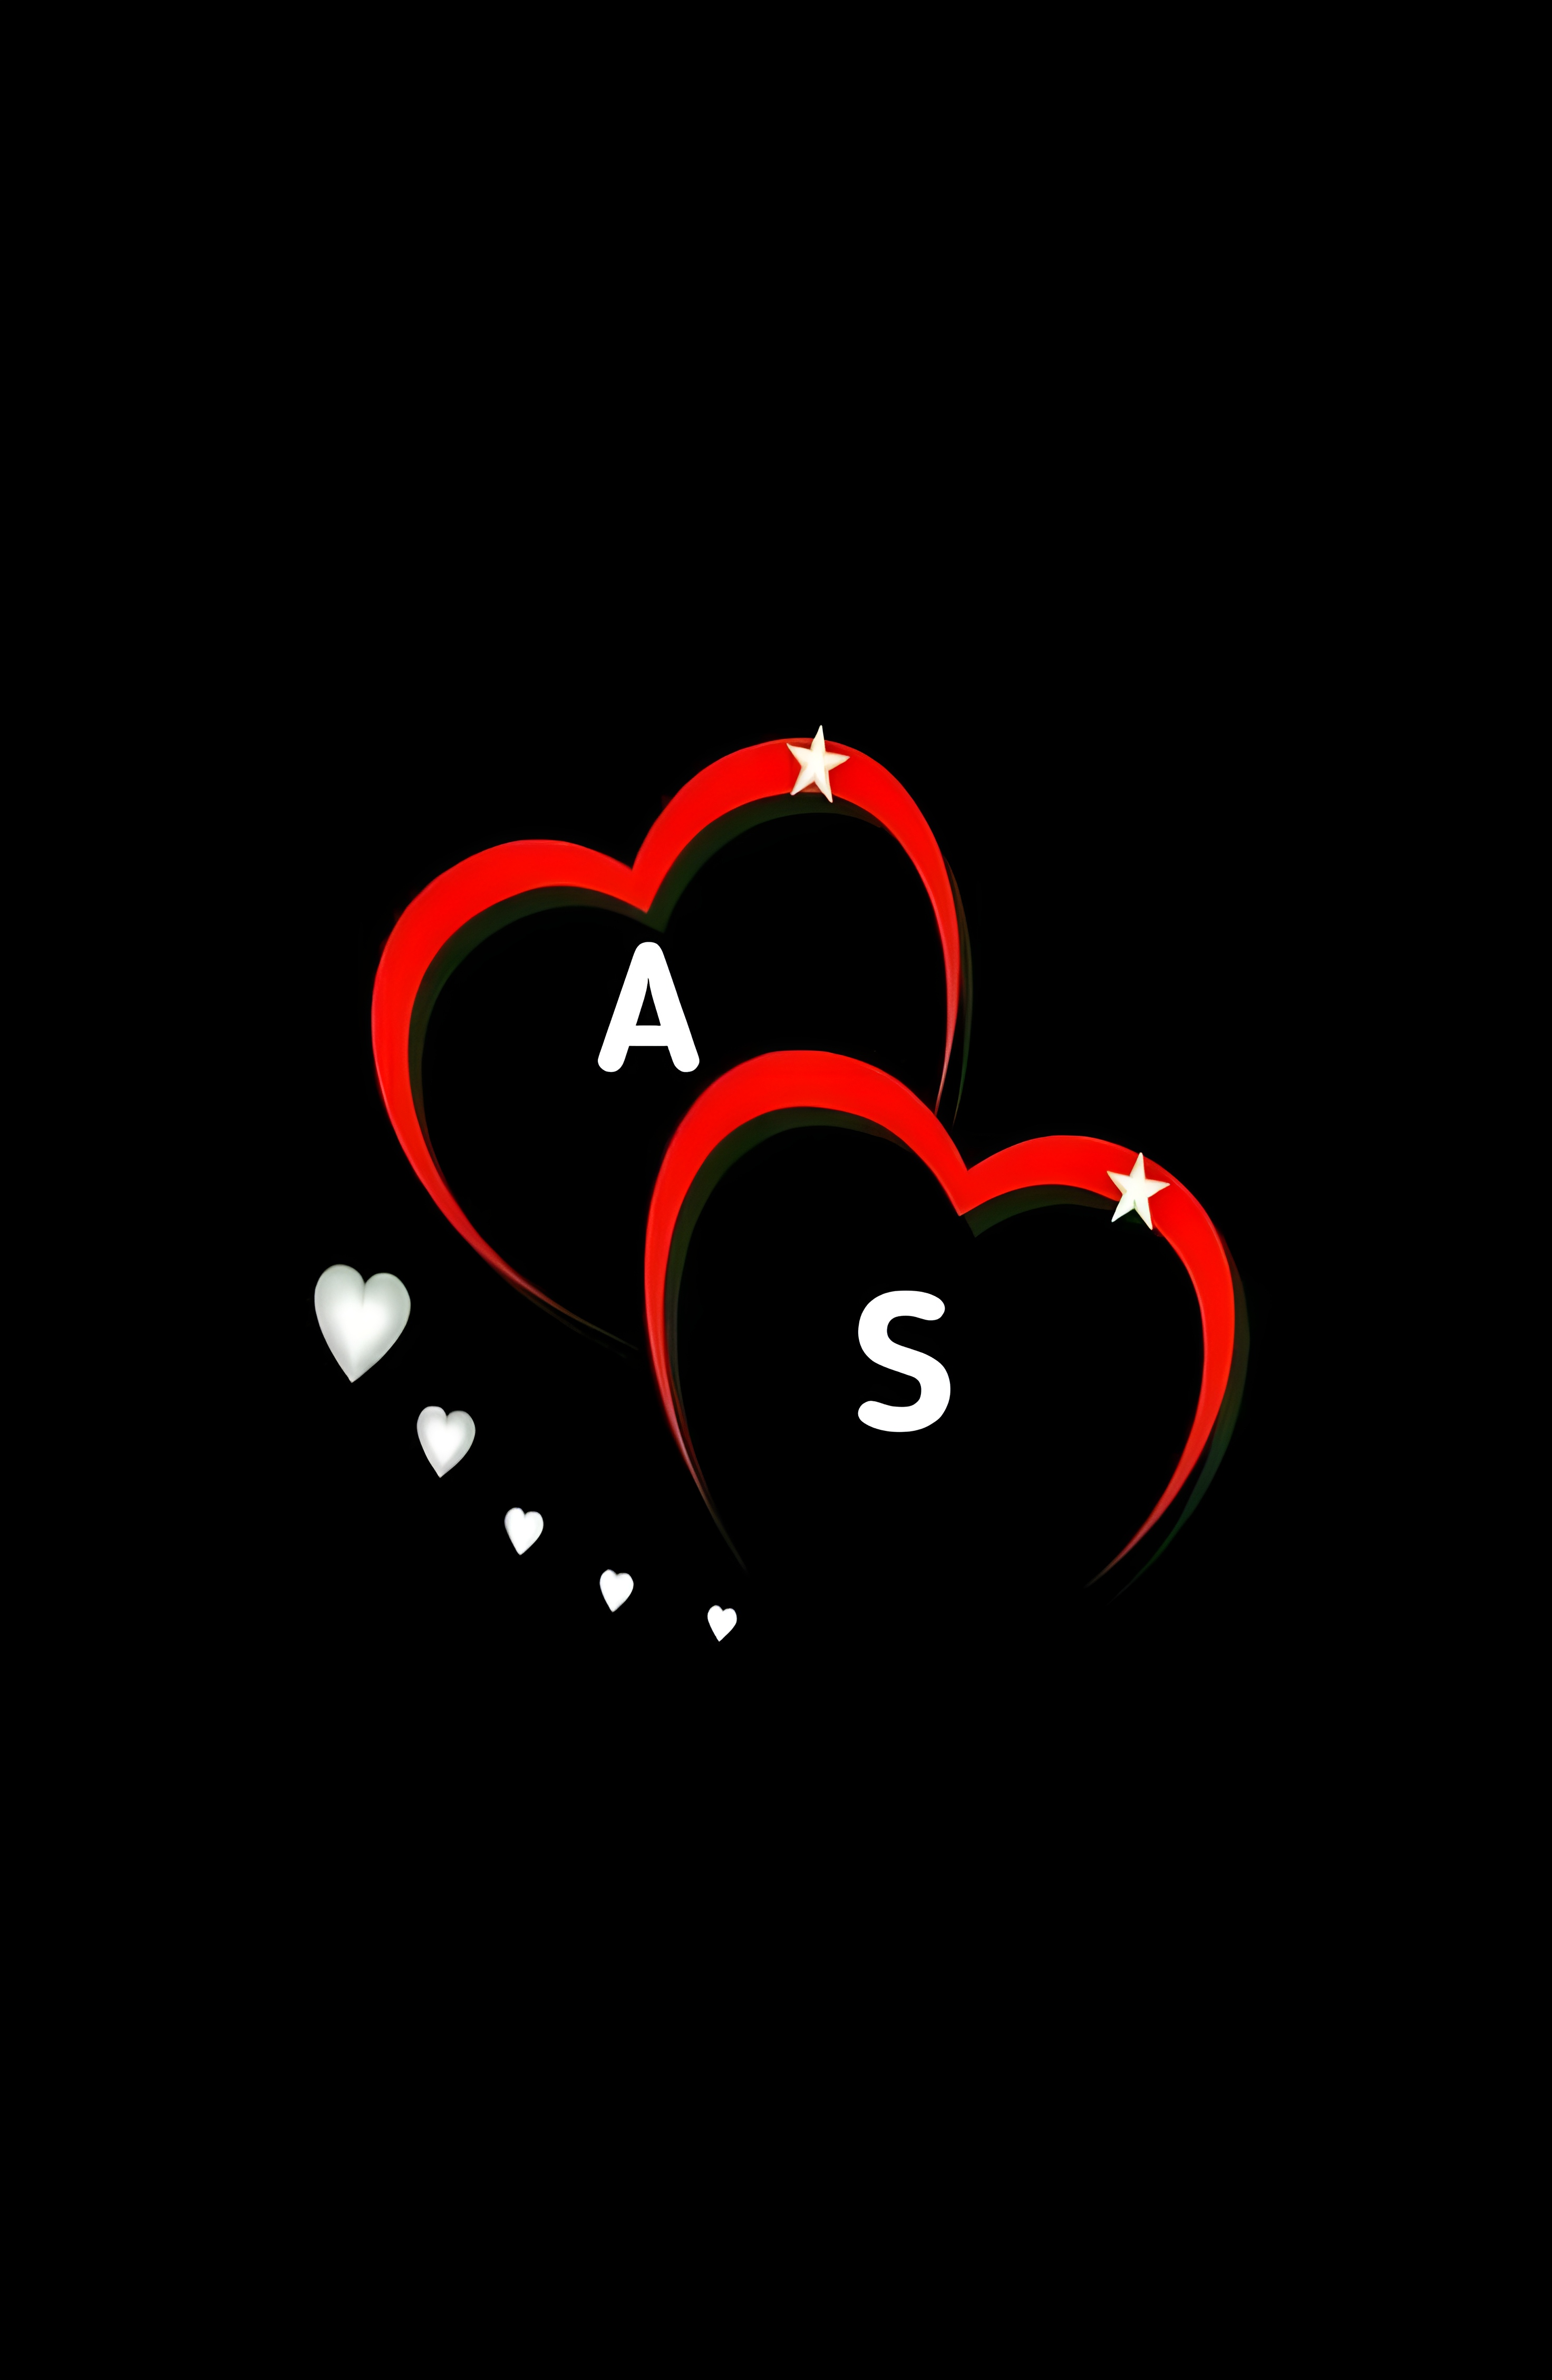 As Name - a s in heart